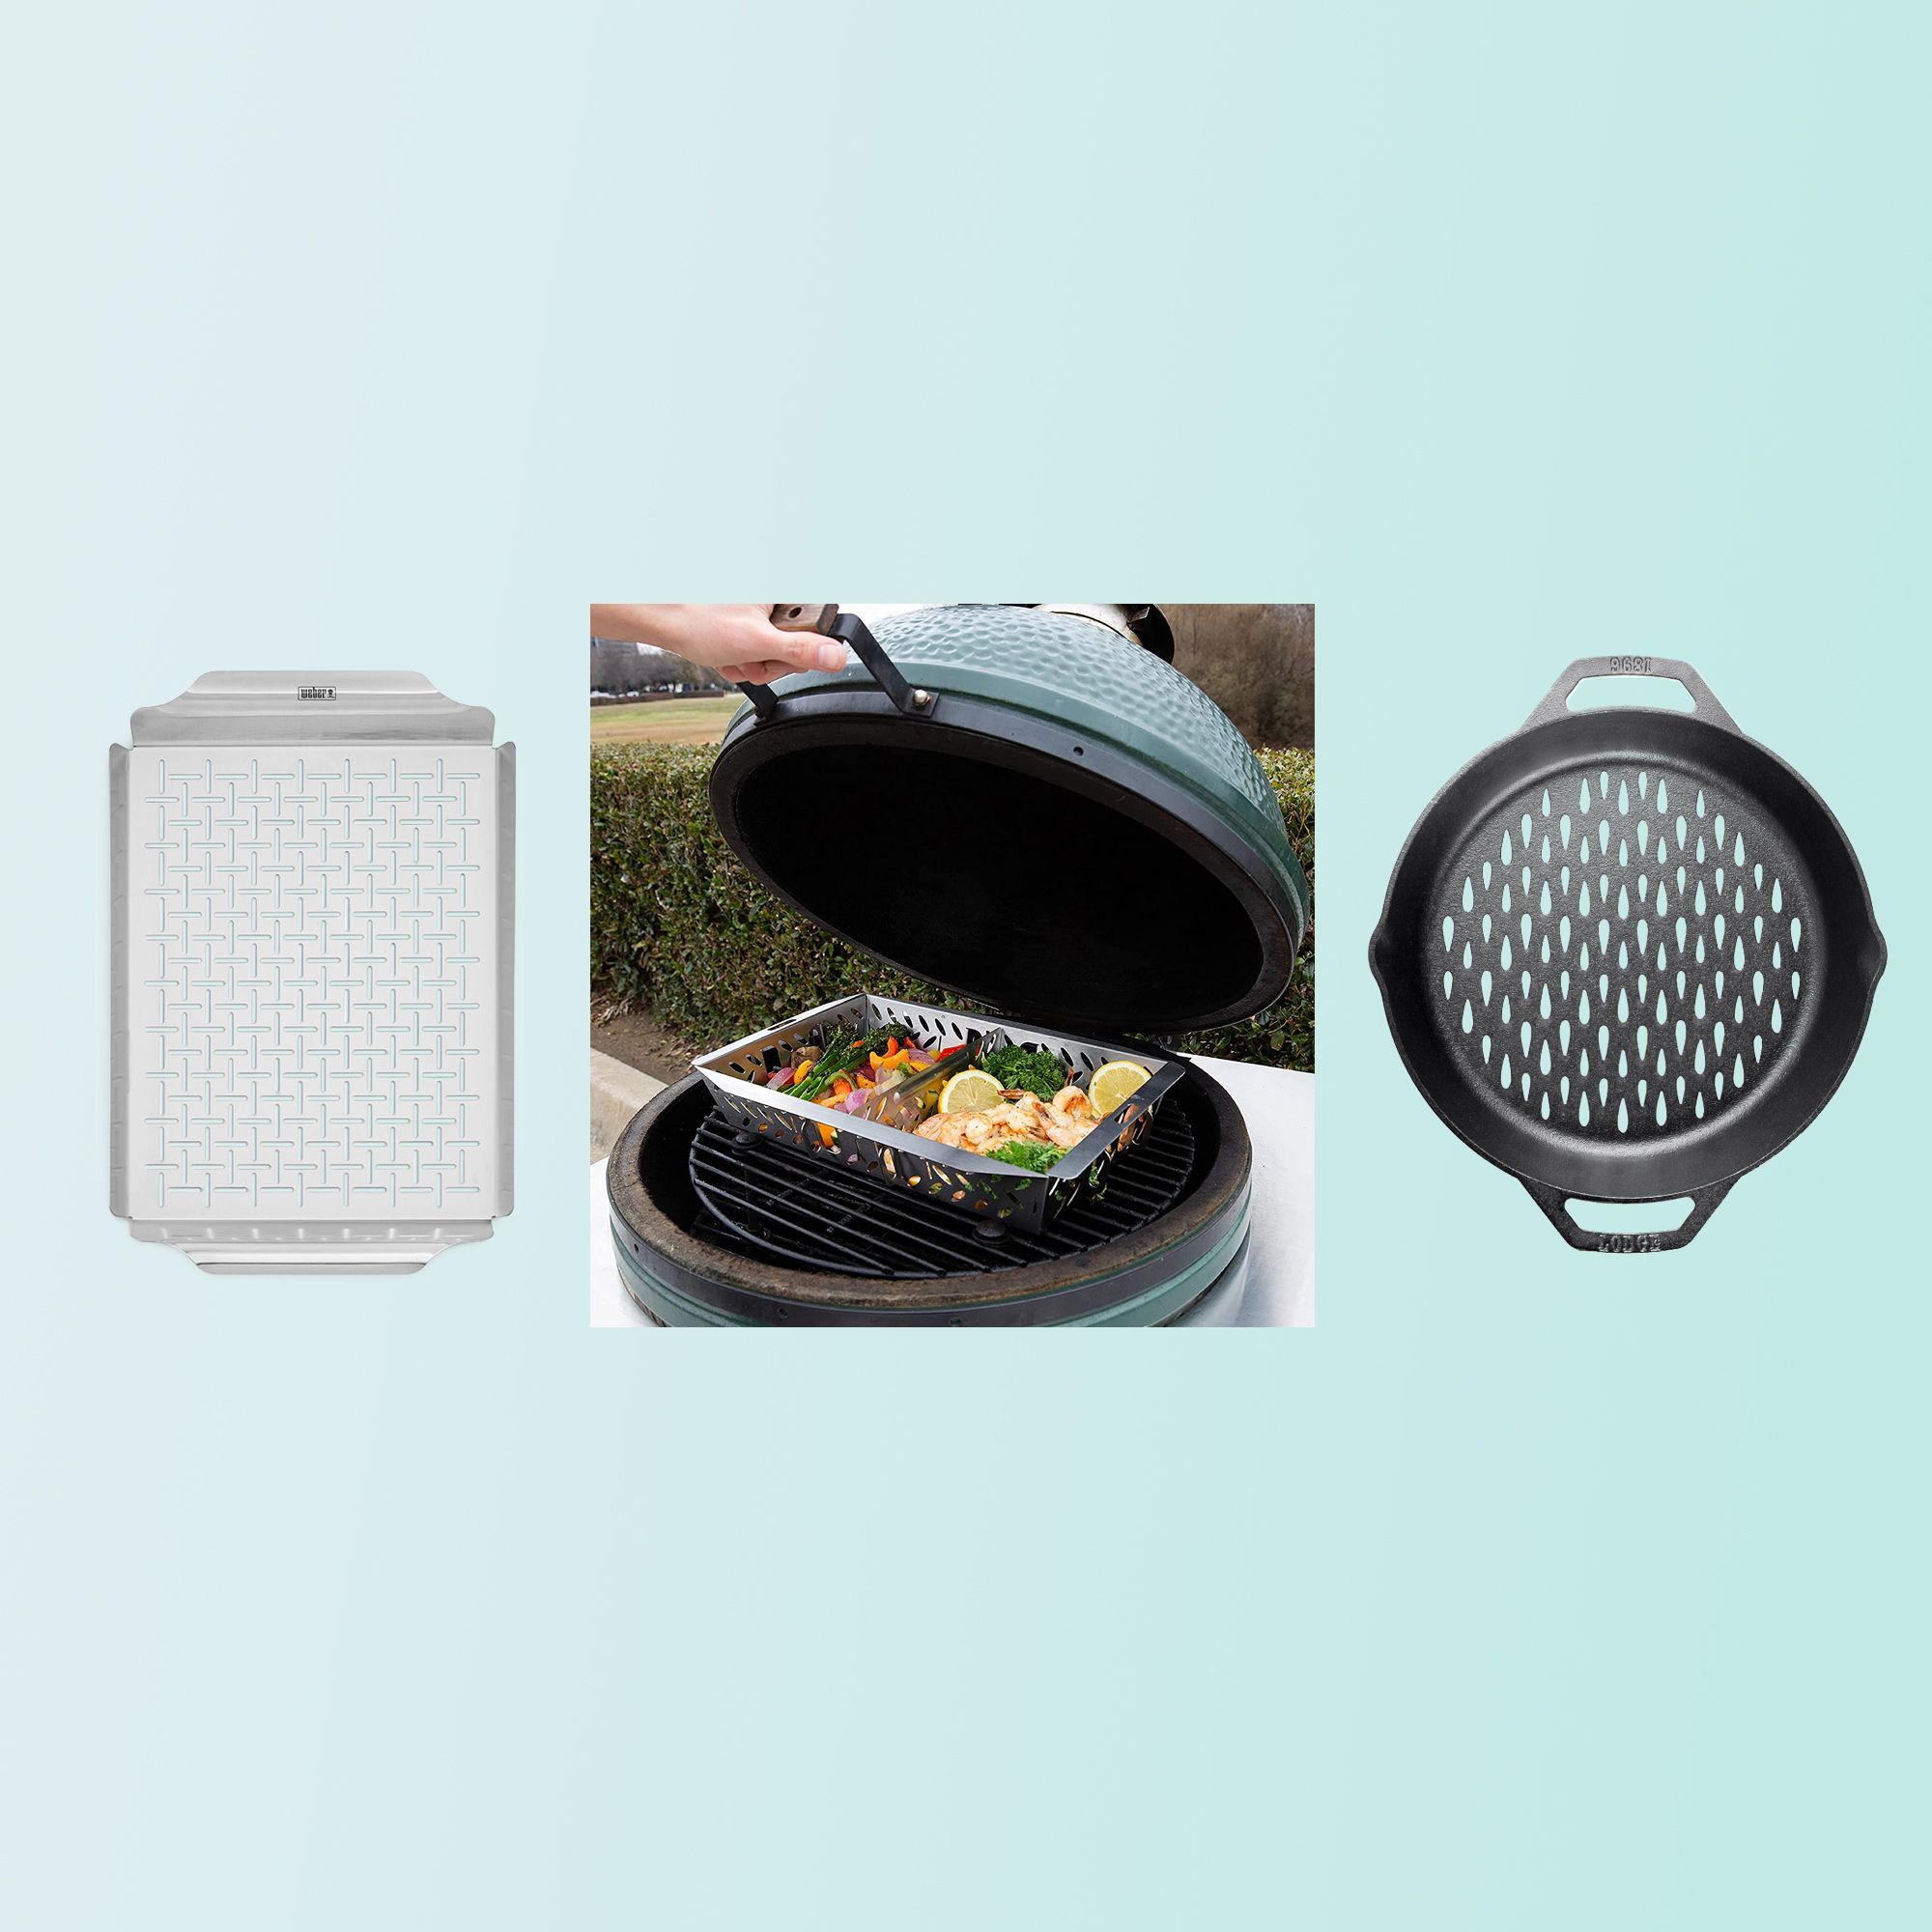 Bbq Grill Pans, Stainless Steel Grill Pan, Grill Basket Griddle